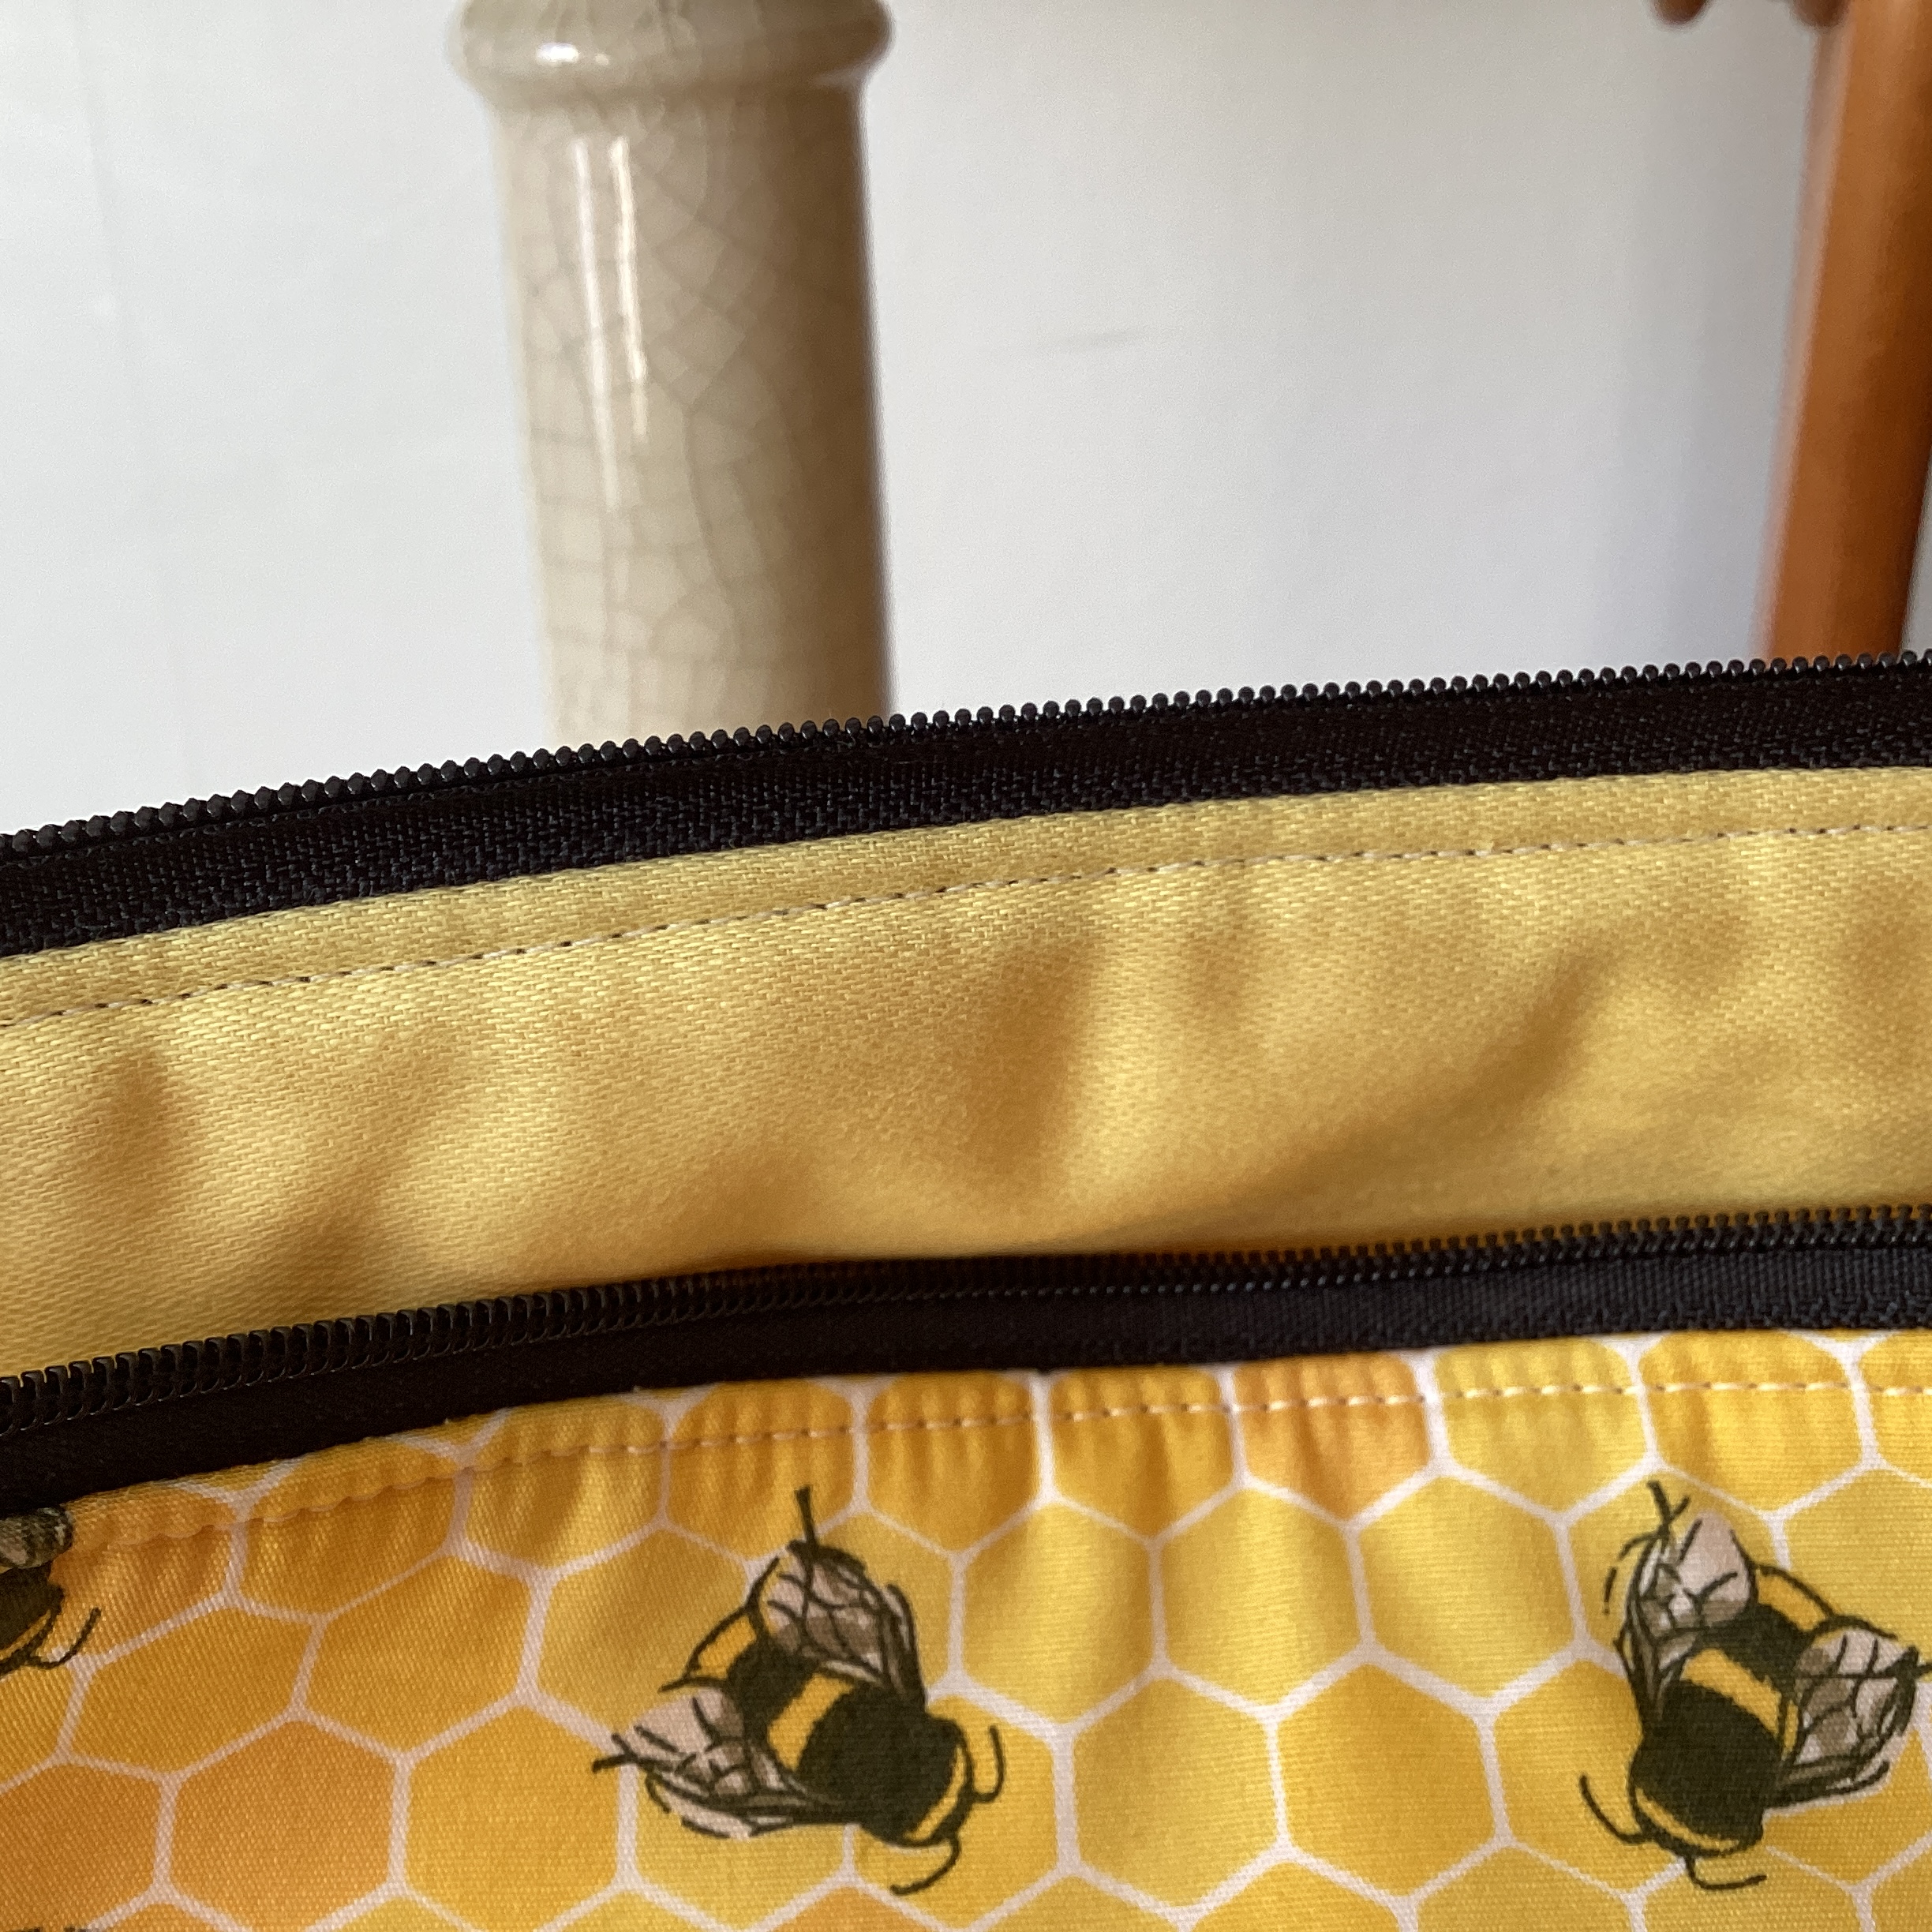 Zipped Pouch - bees